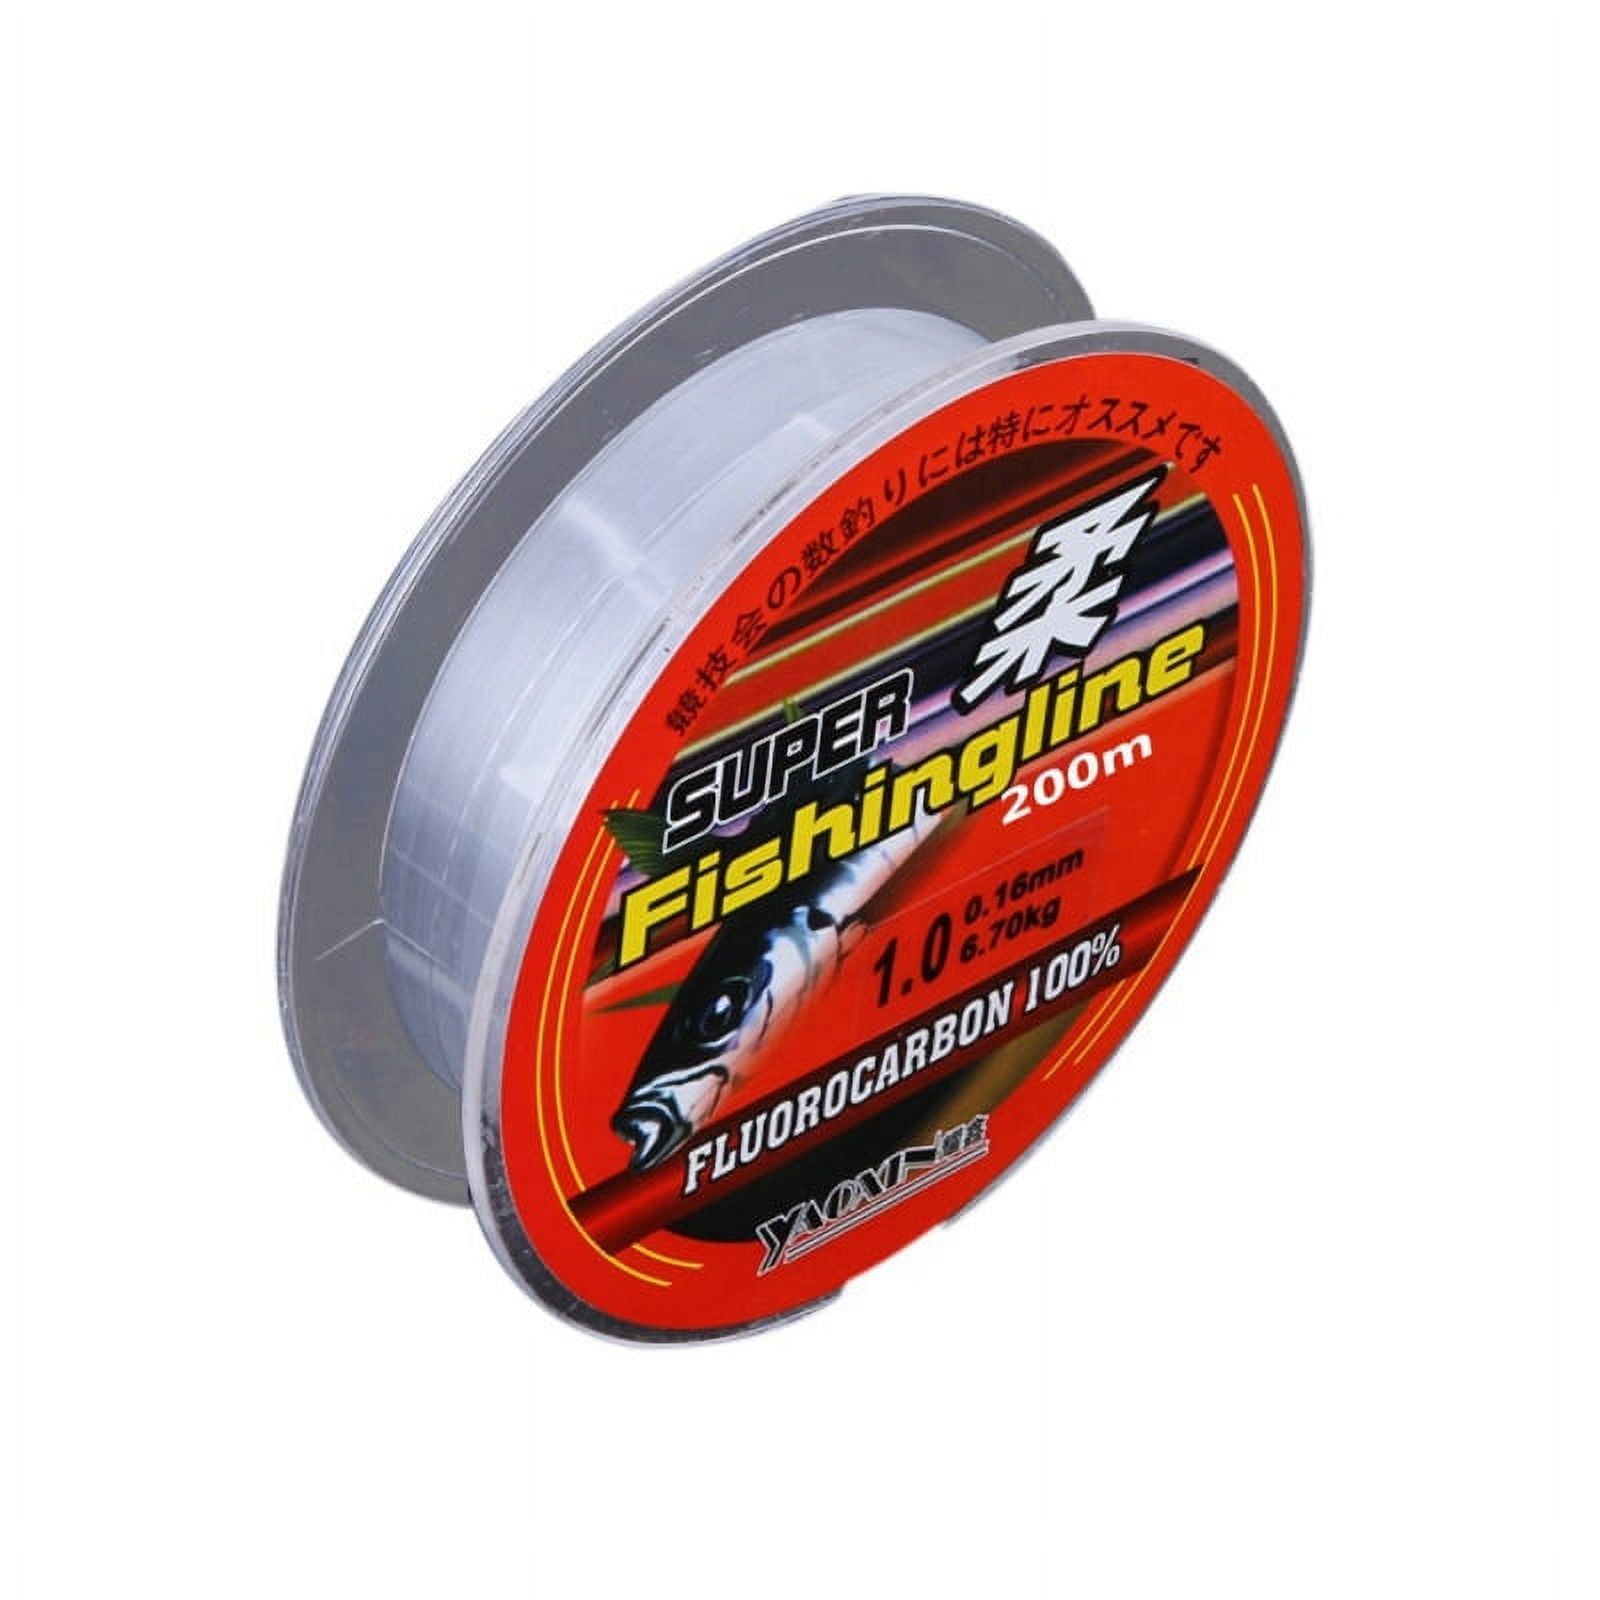 200 meters Nylon Super Strong Fishing Line Japanese 100% Nylon Transparent  Not Fluorocarbon multifunctional Fishing Tackle Not 